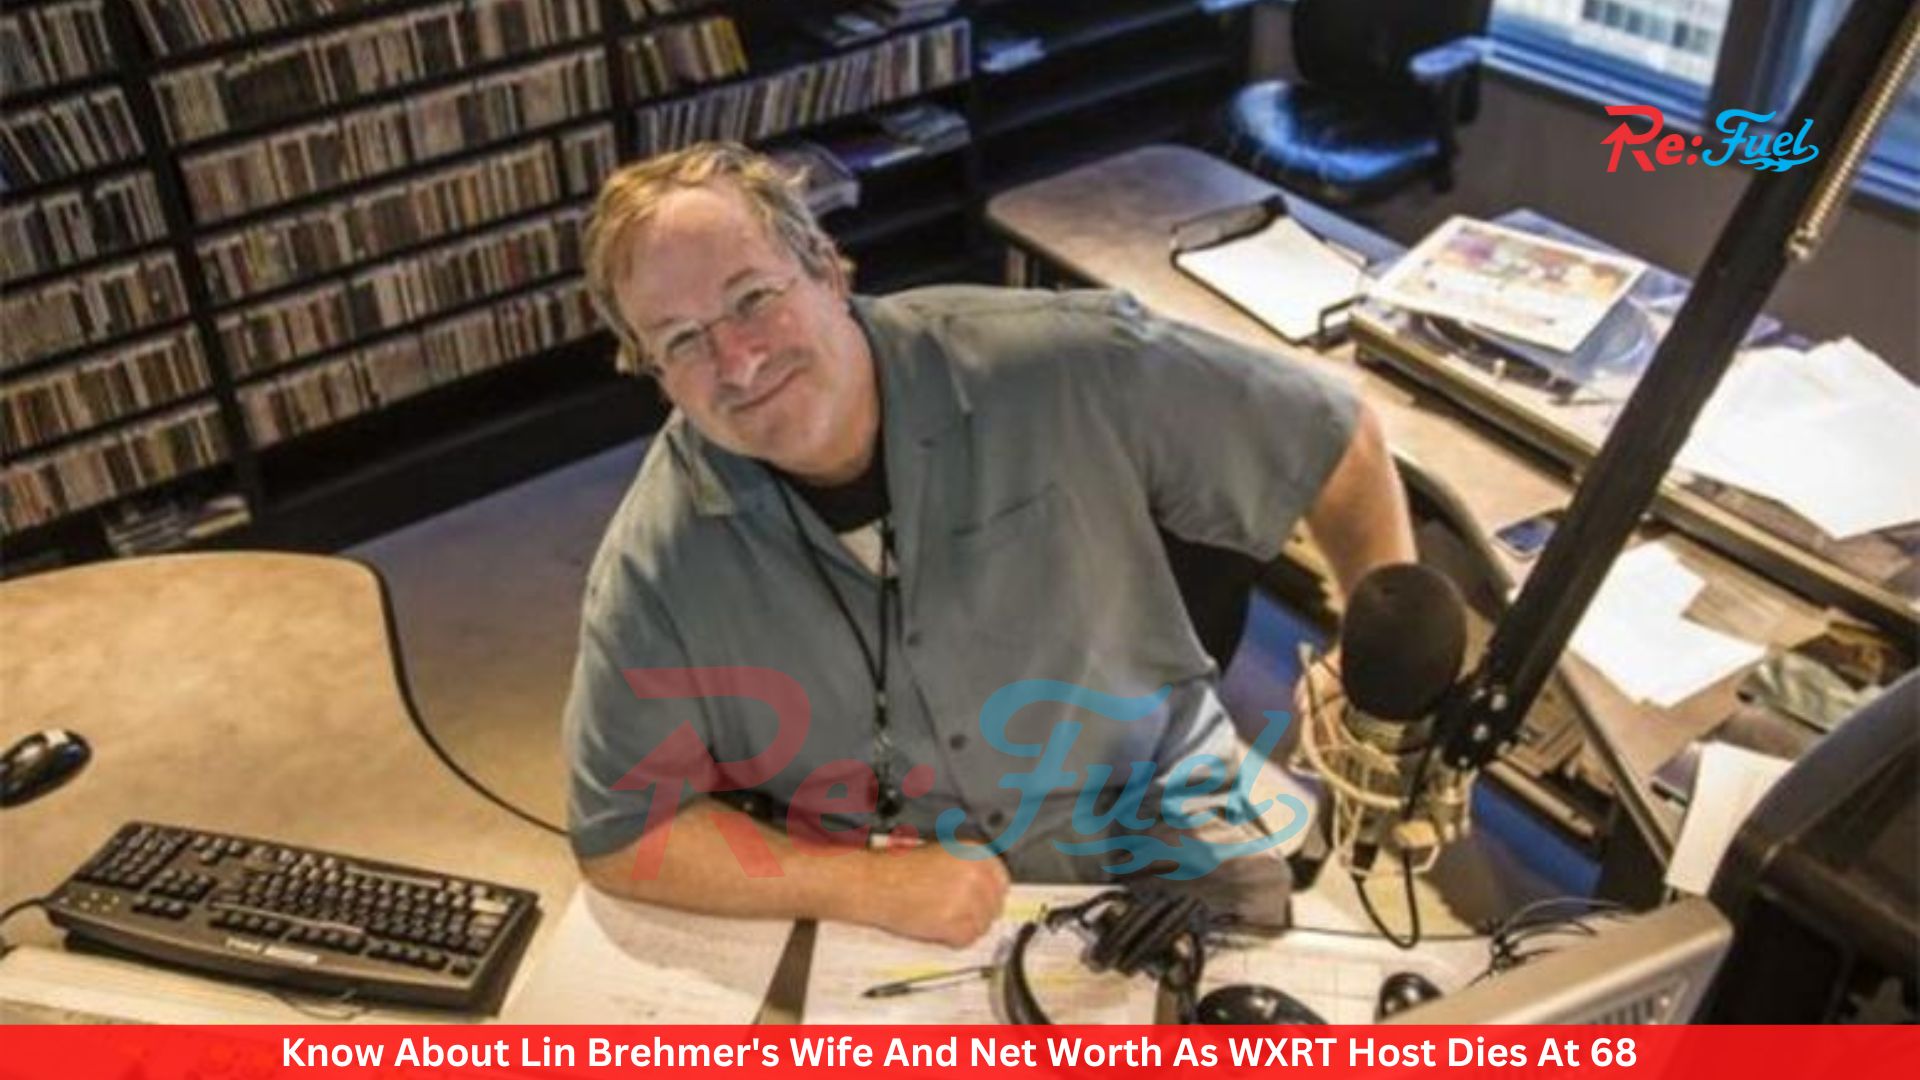 Know About Lin Brehmer's Wife And Net Worth As WXRT Host Dies At 68